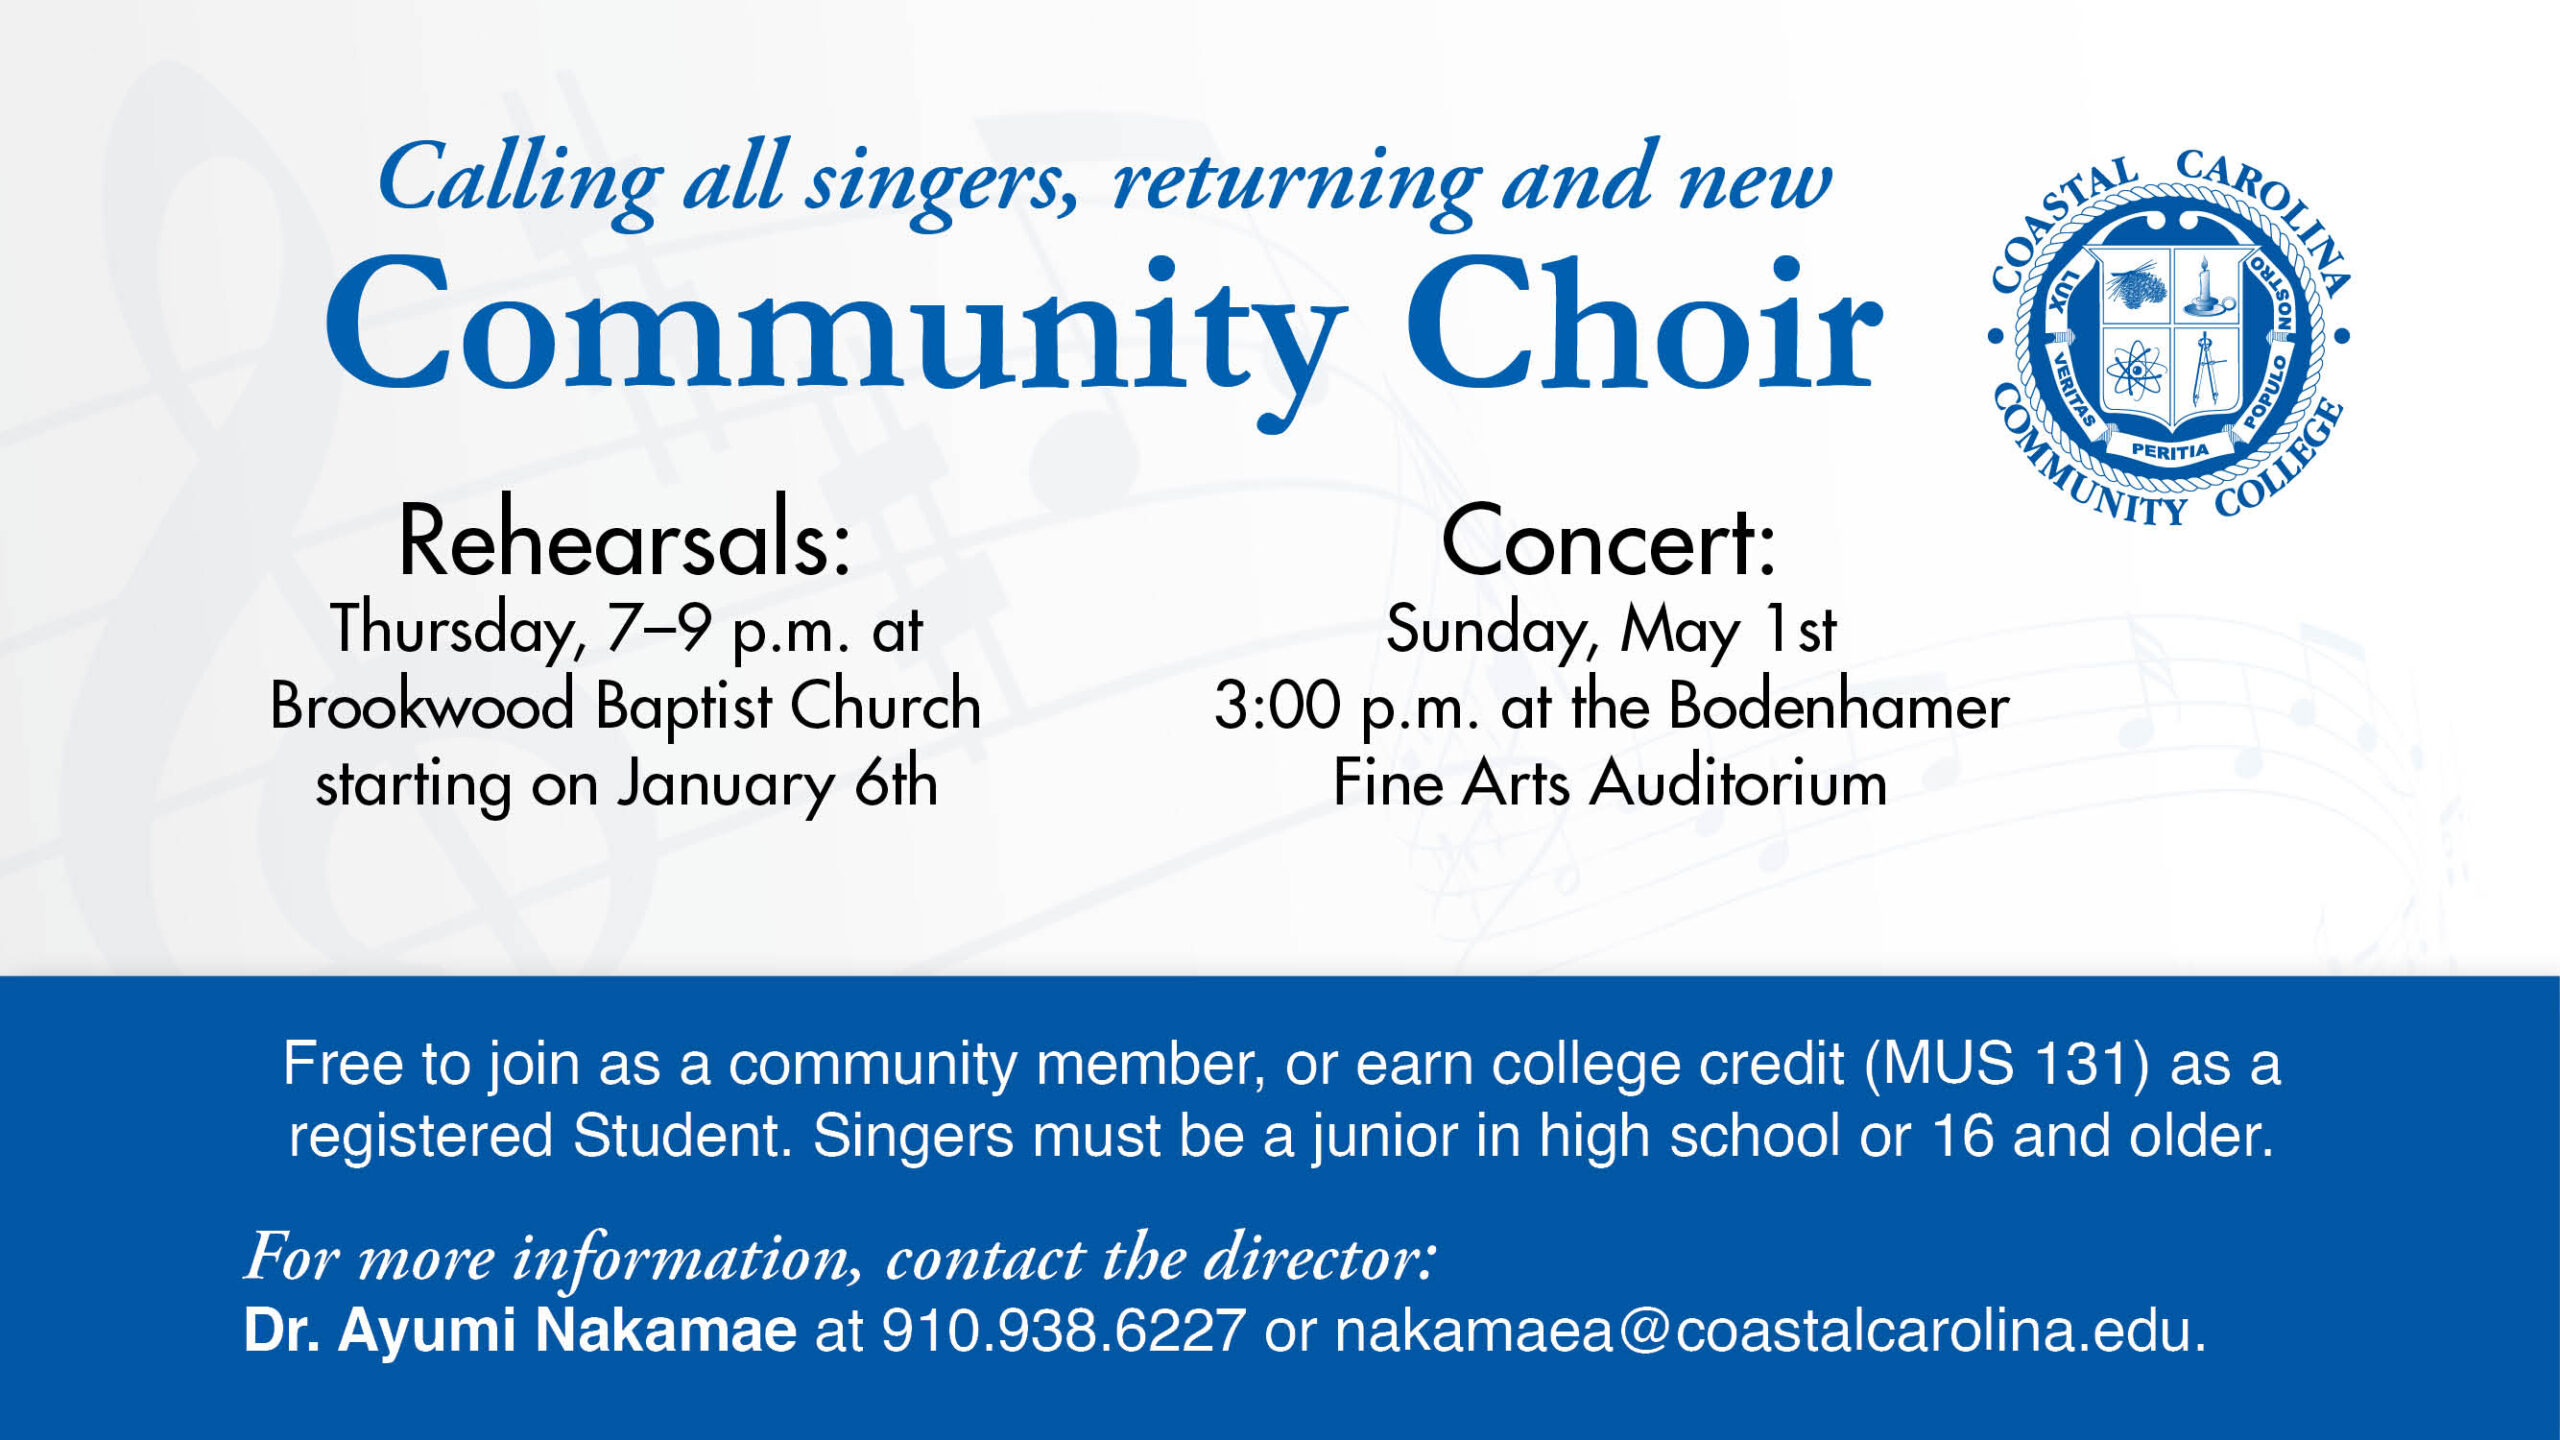 Calling all singers, returning and new | Community Choir | Rehearsals: Thursday, 7-9pm at Brookwood Baptist Church starting on January 6th | Concert: Sunday, May 1st 3:00p, at the Bodenhamer Fine Arts Auditorium | Free to join as a community member, or earn college credit (MUS 131) as a registered Student. Singers must be a junior in high school or 16 and older. For more information, contact the director: Dr. Ayumi Nakamae at 910.938.6227 or nakamaea@coastalcarolina.edu